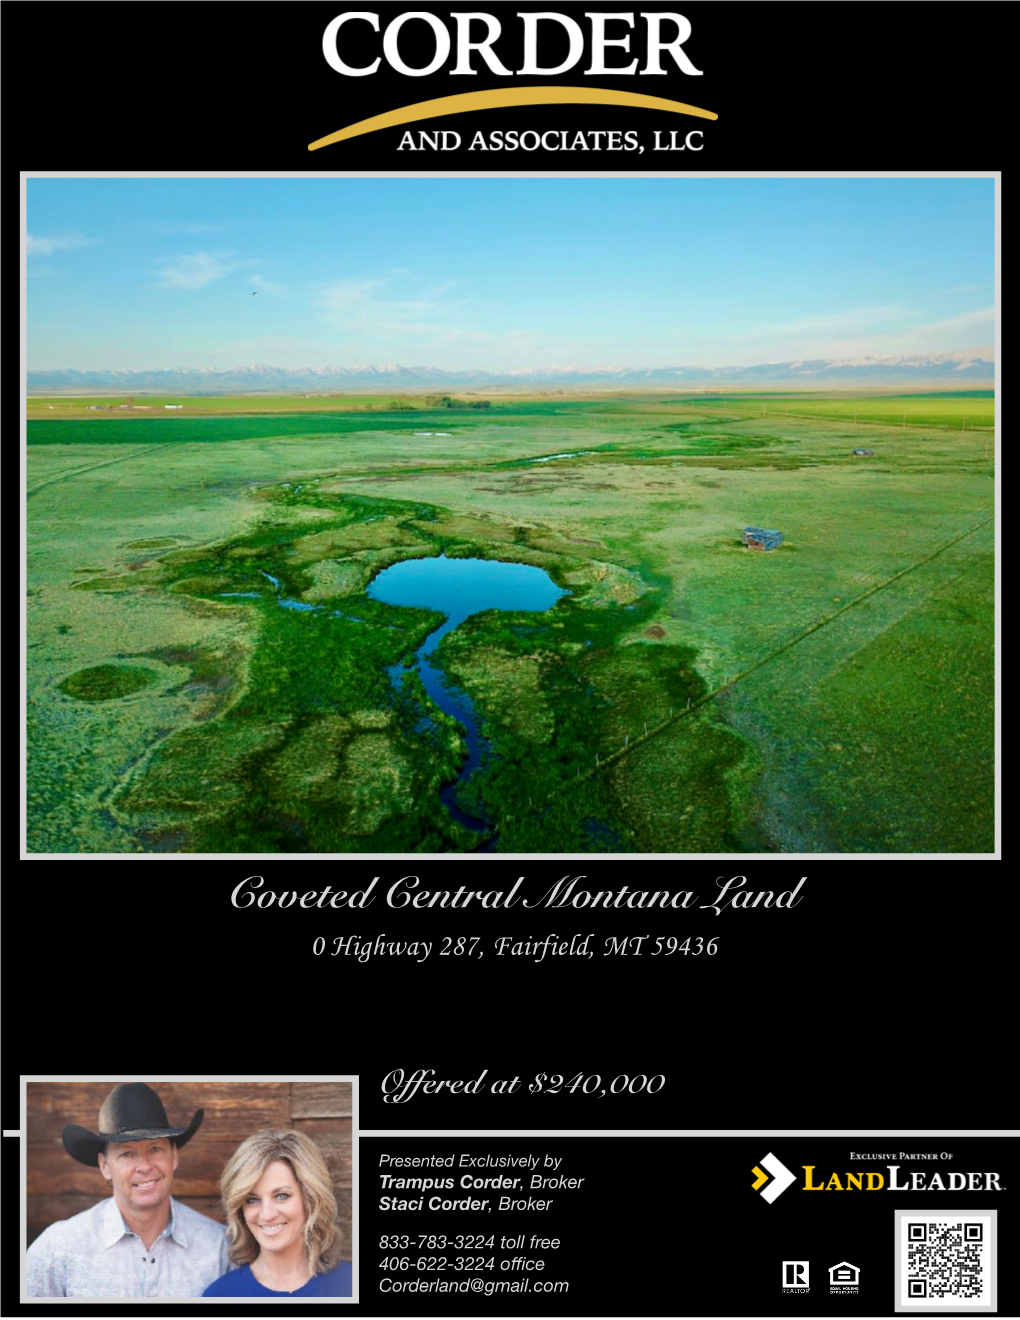 Coveted Central Montana Land 0 Highway 287, Fairfield, MT 59436